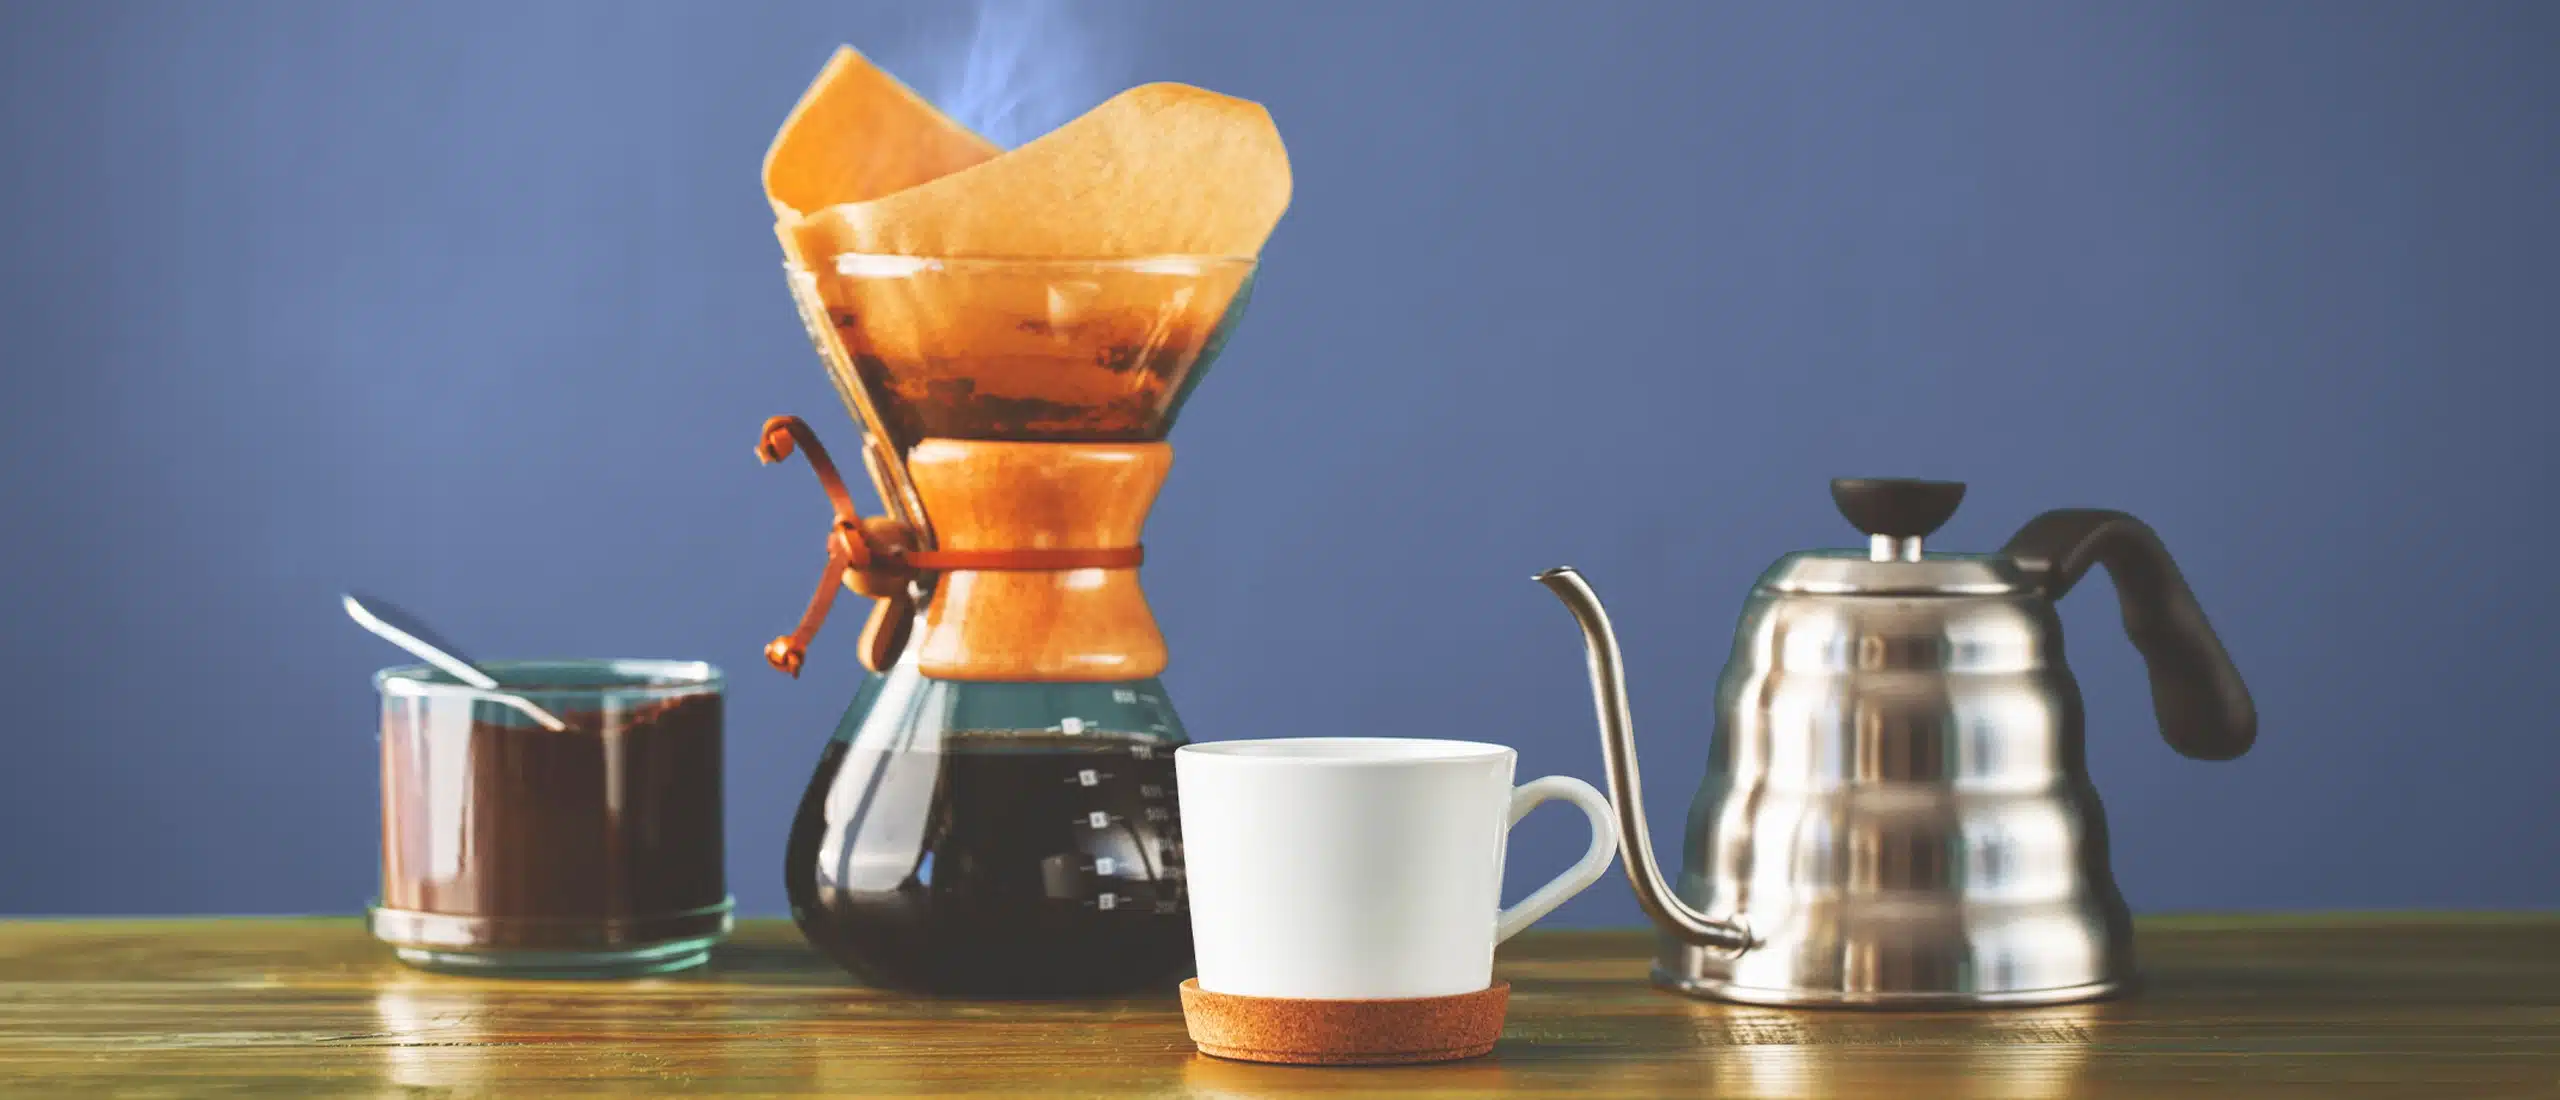 Plastic-Free Coffee Makers Can Still Make Great Coffee. Here's